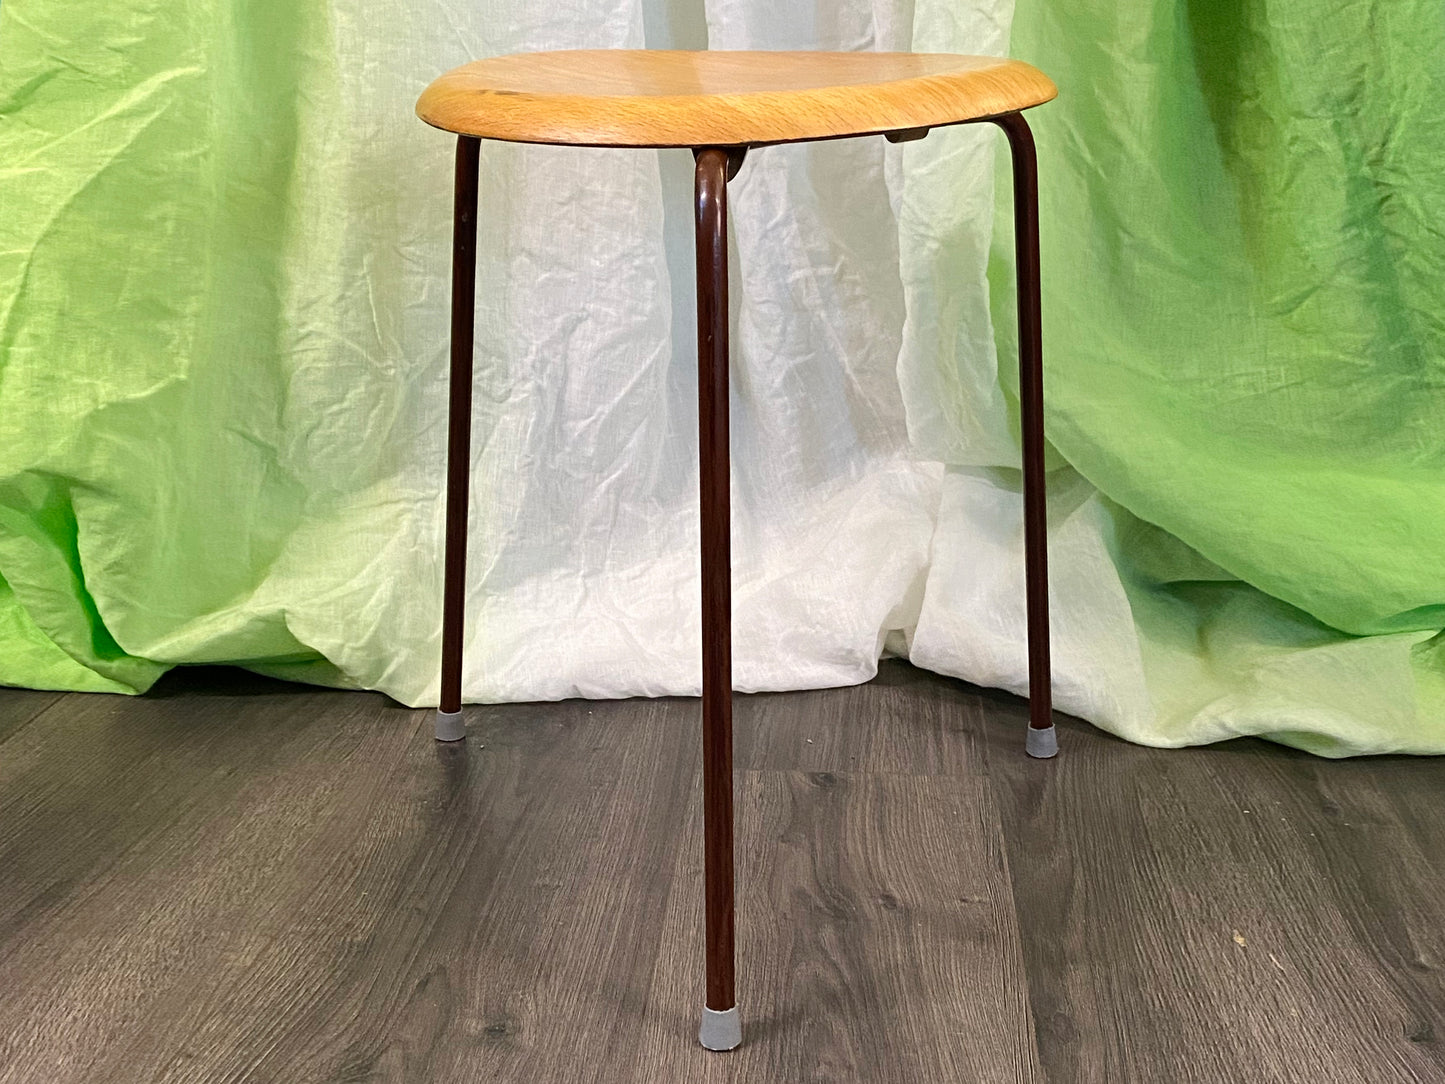 Rare Early Tripod Dot Stool by Fritz Hansen - Teak and Painted Metal - Denmark 1960s